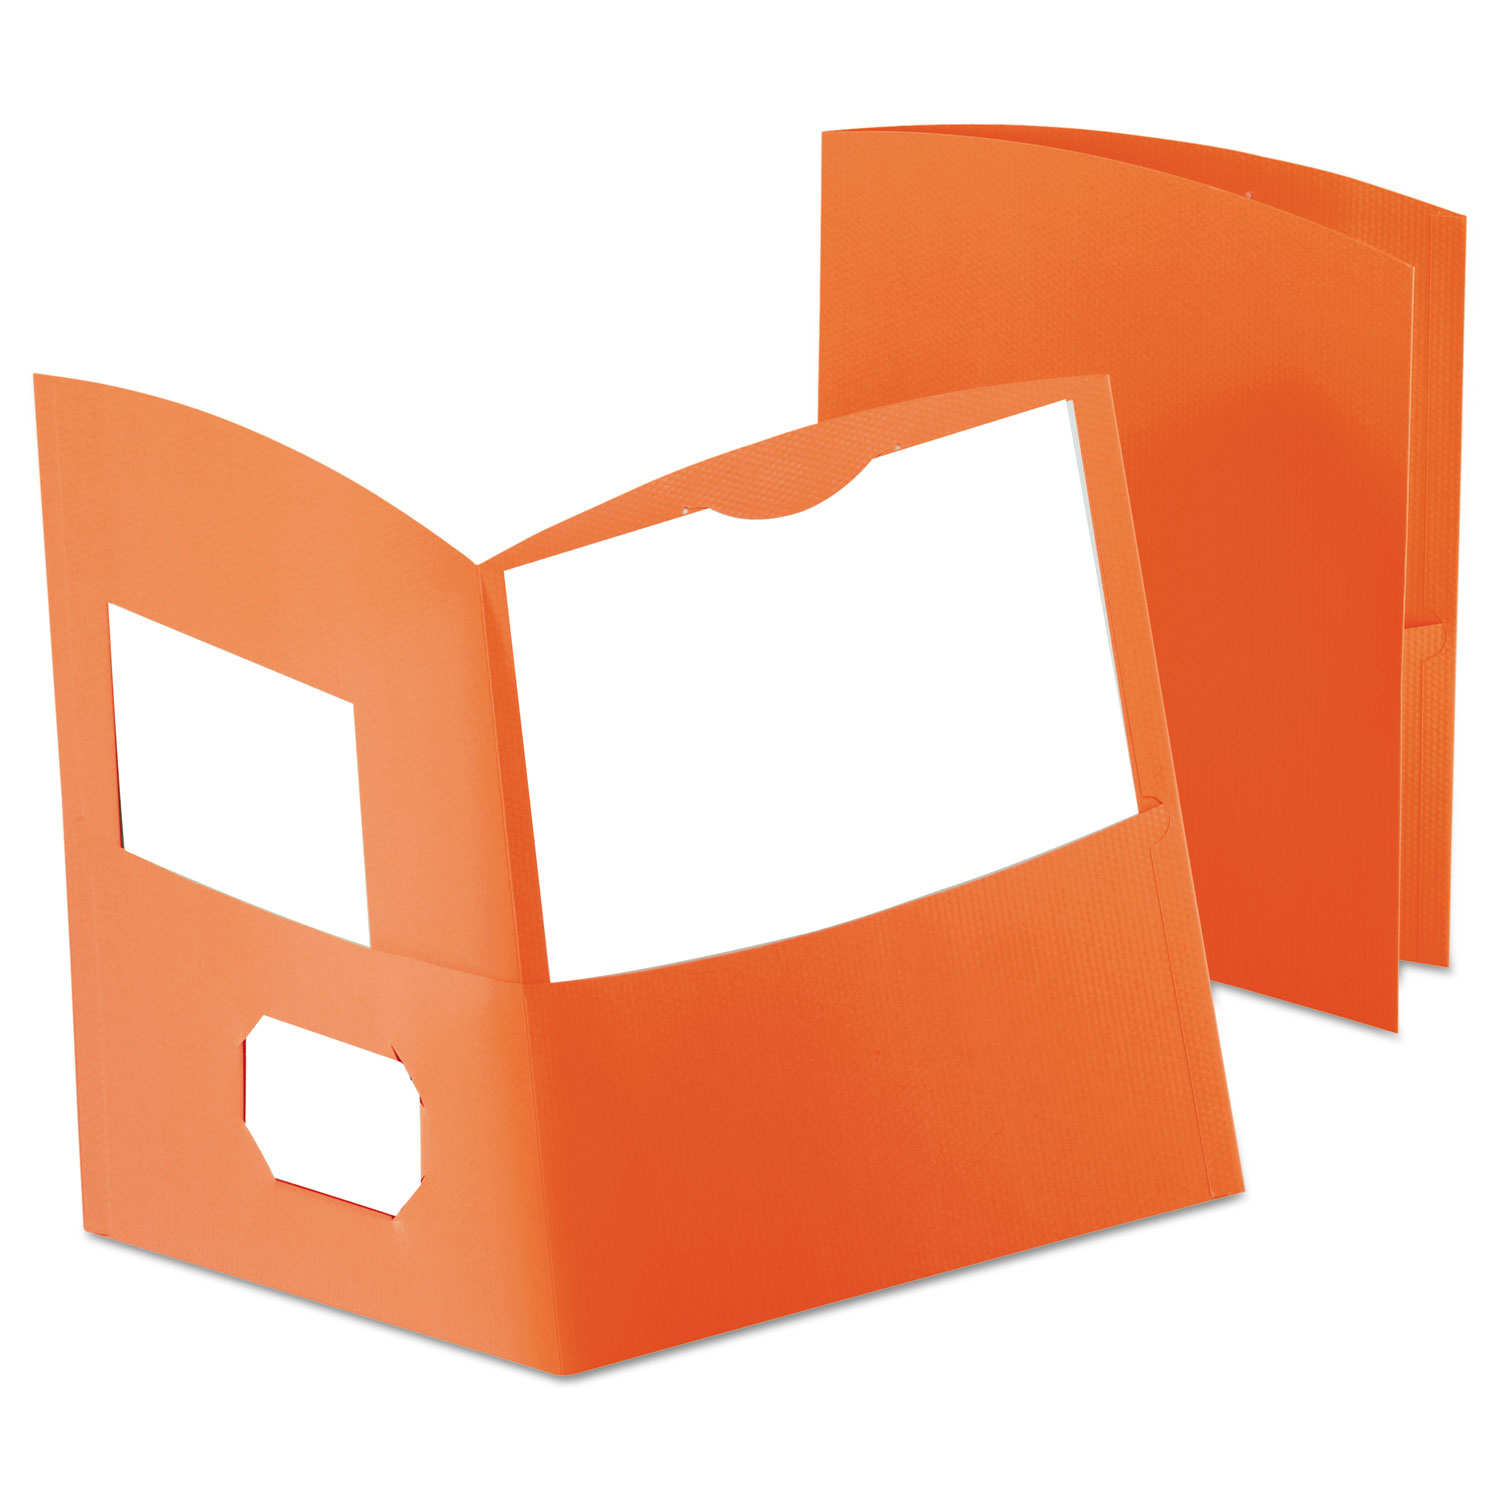  Oxford 5062580 Contour Two-Pocket Recycled Paper Folder, 100-Sheet Capacity, Orange (OXF5062580) 